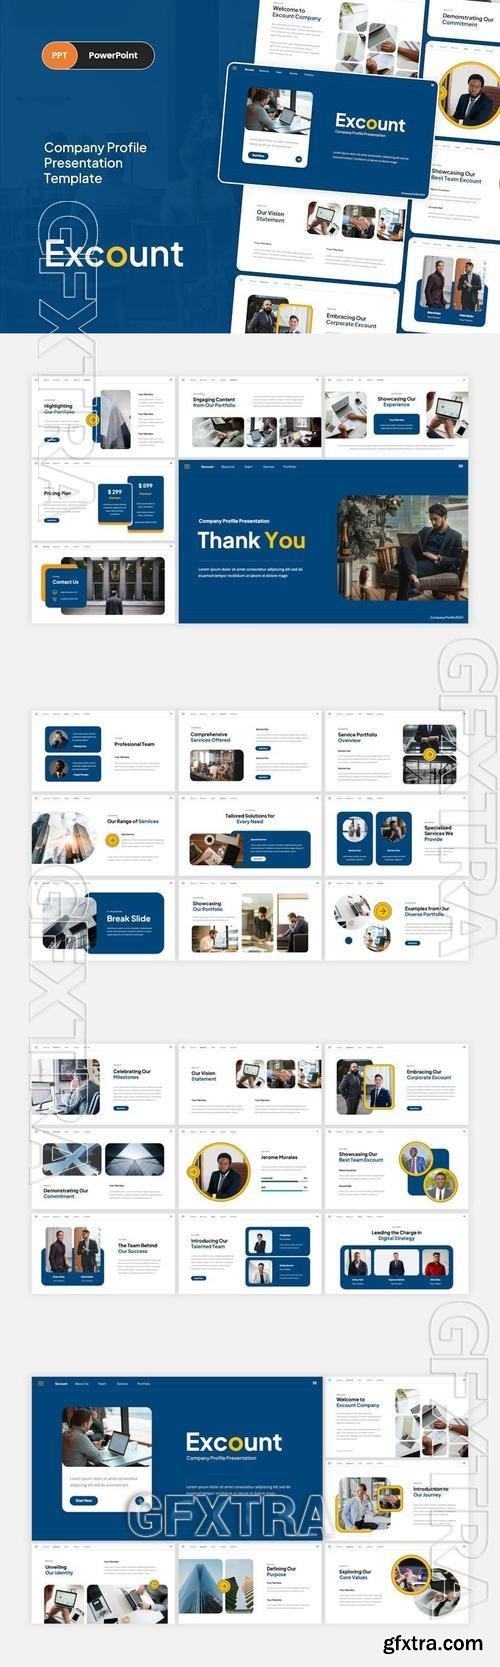 Excount - Company Profile PowerPoint Template QCE53LW